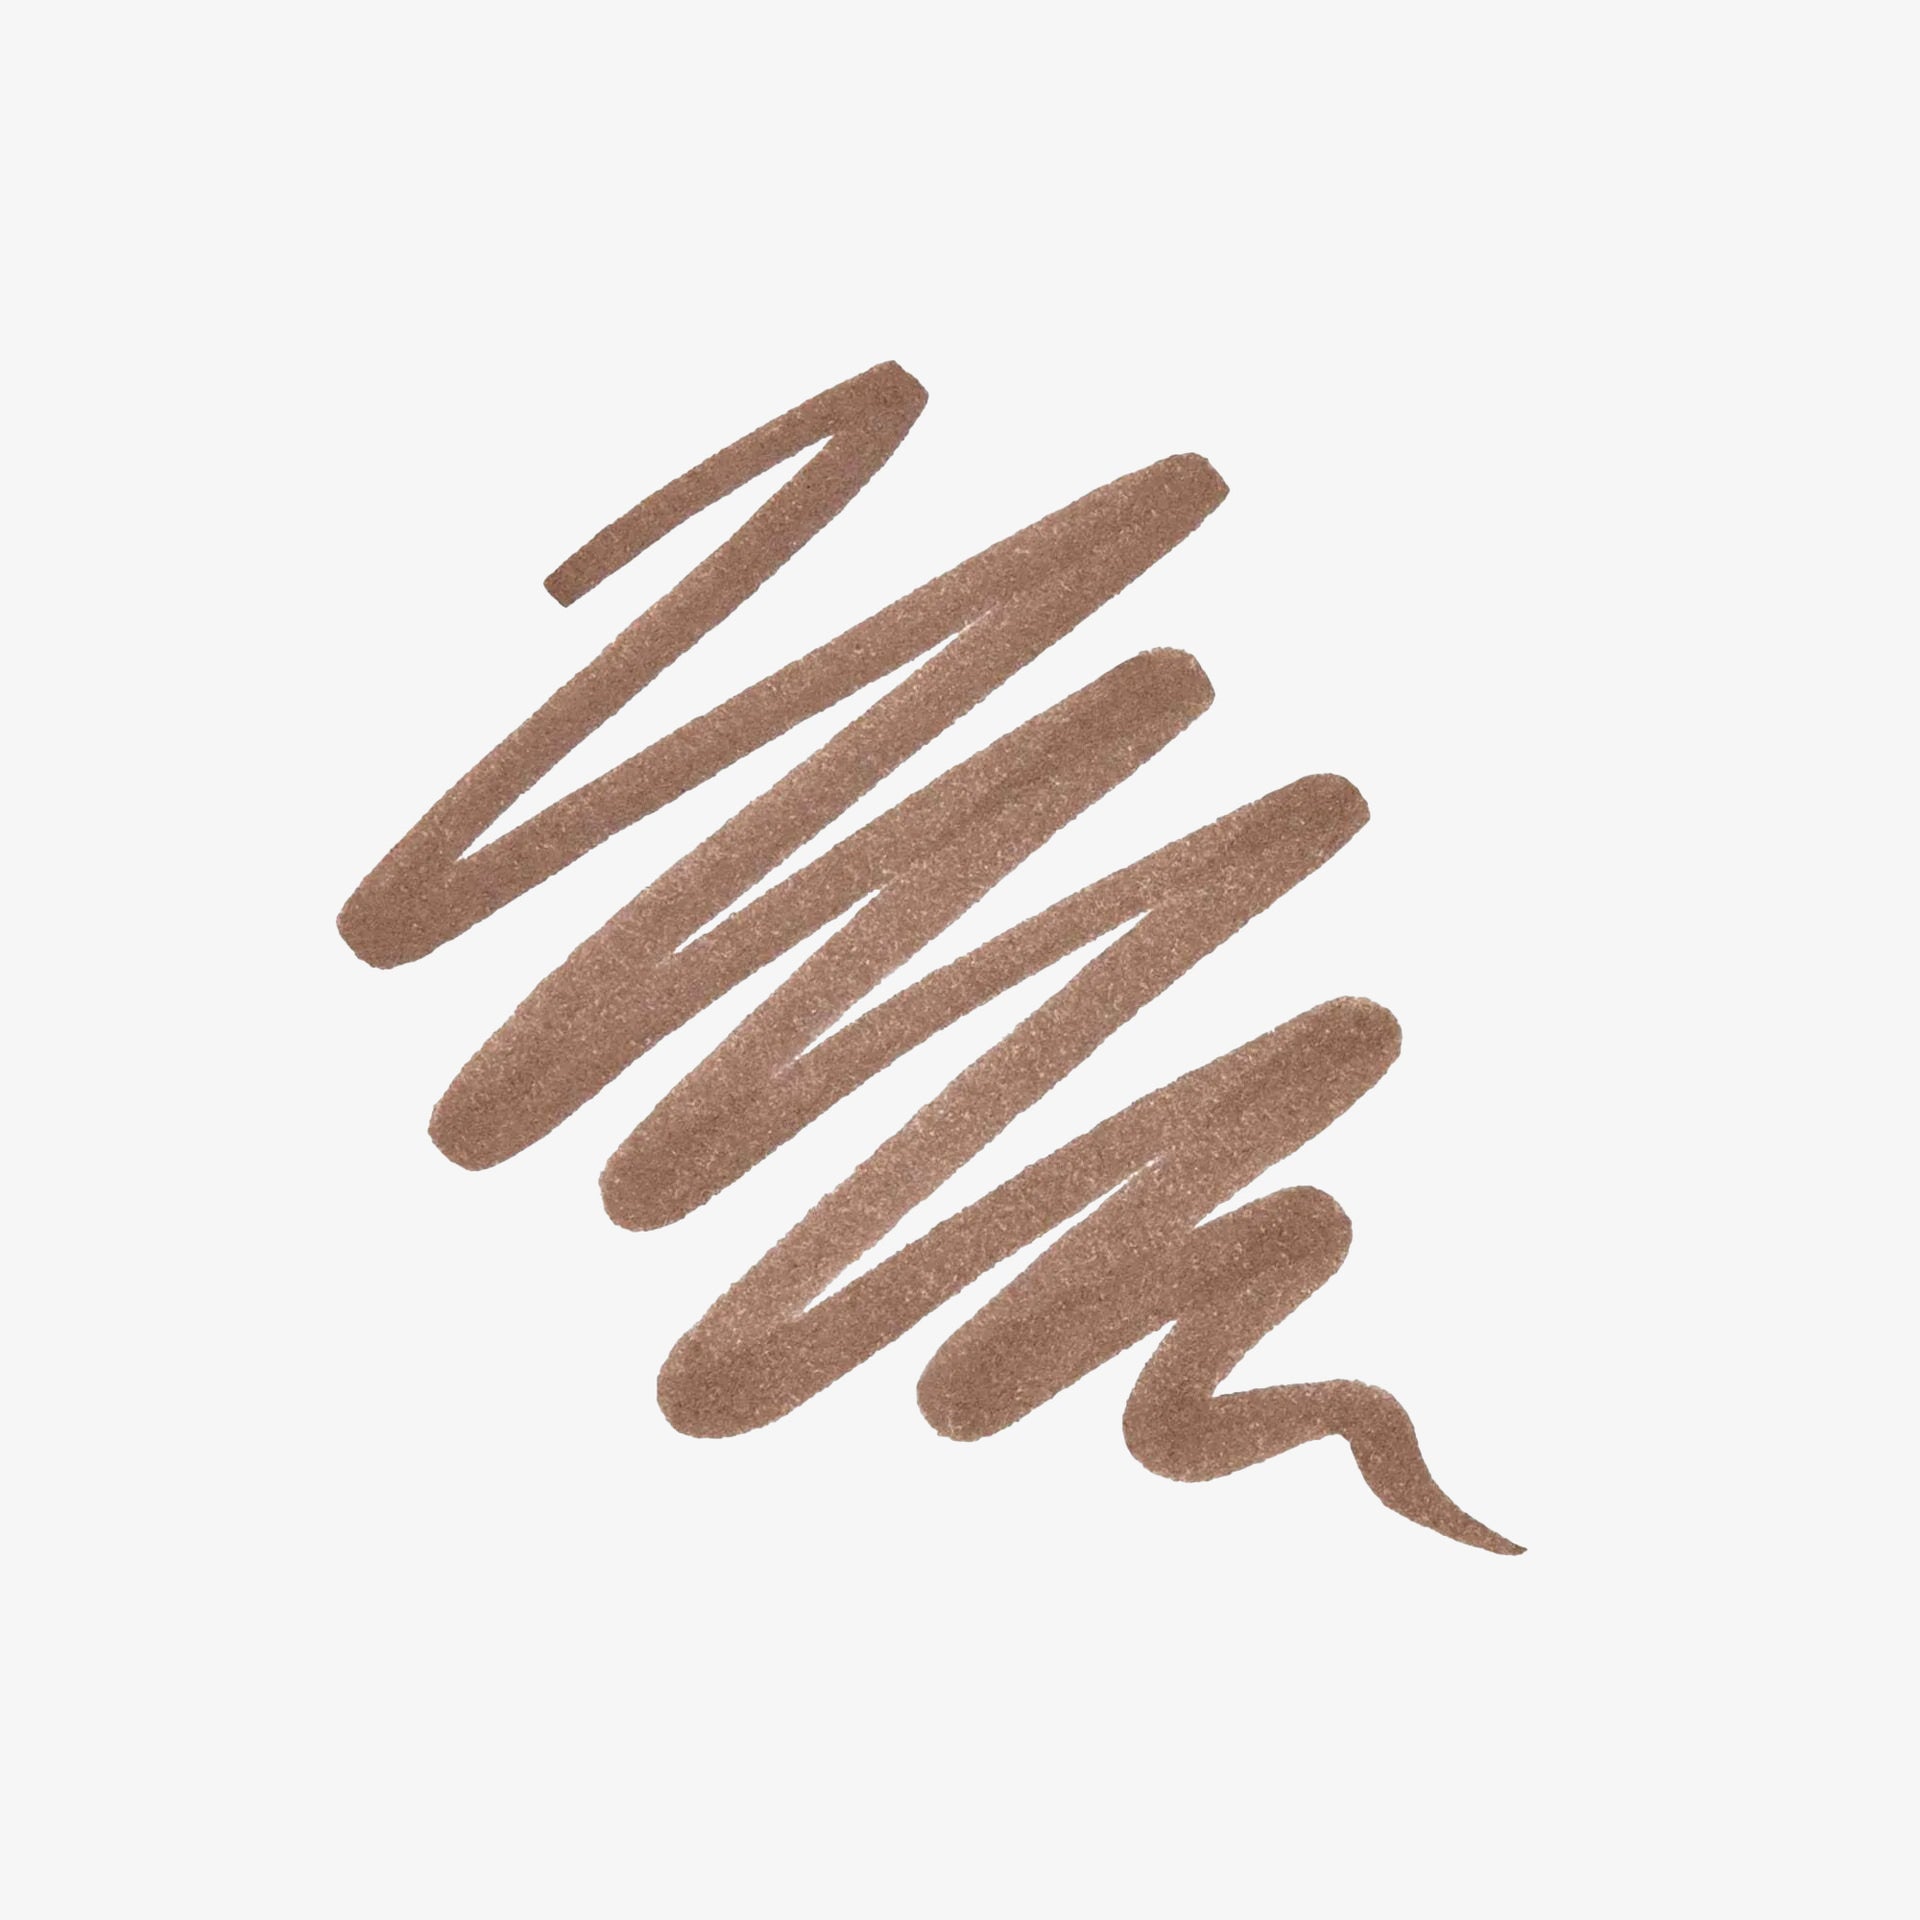 Soft Brown | Brow Pen Swatch Shade Soft Brown